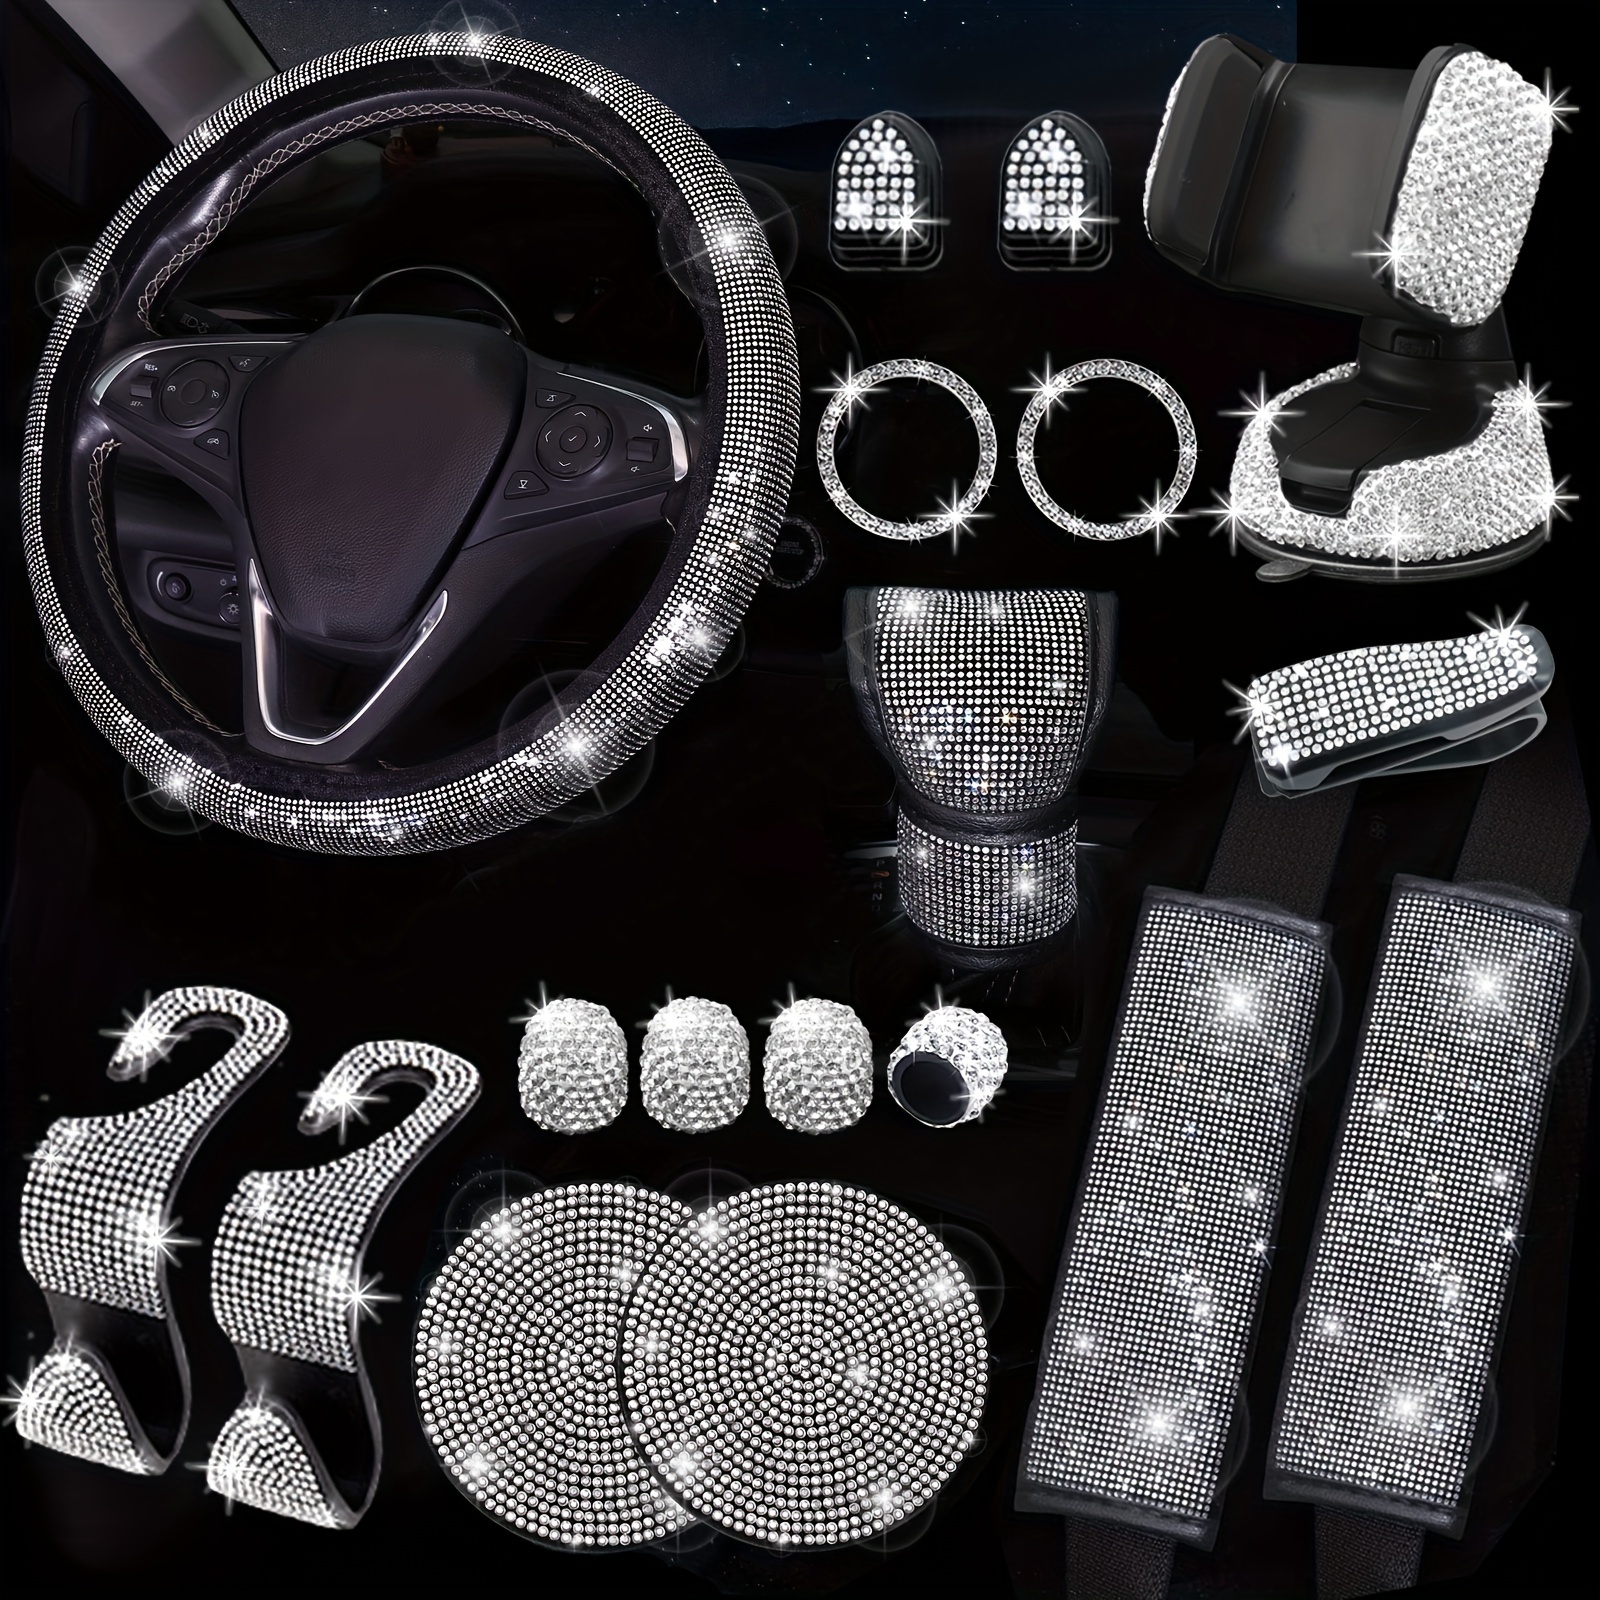 10 Pc Pink Leather Steering Wheel Cover Set - With Seat Belt Pads, Cup  Holders, Bling Buttons